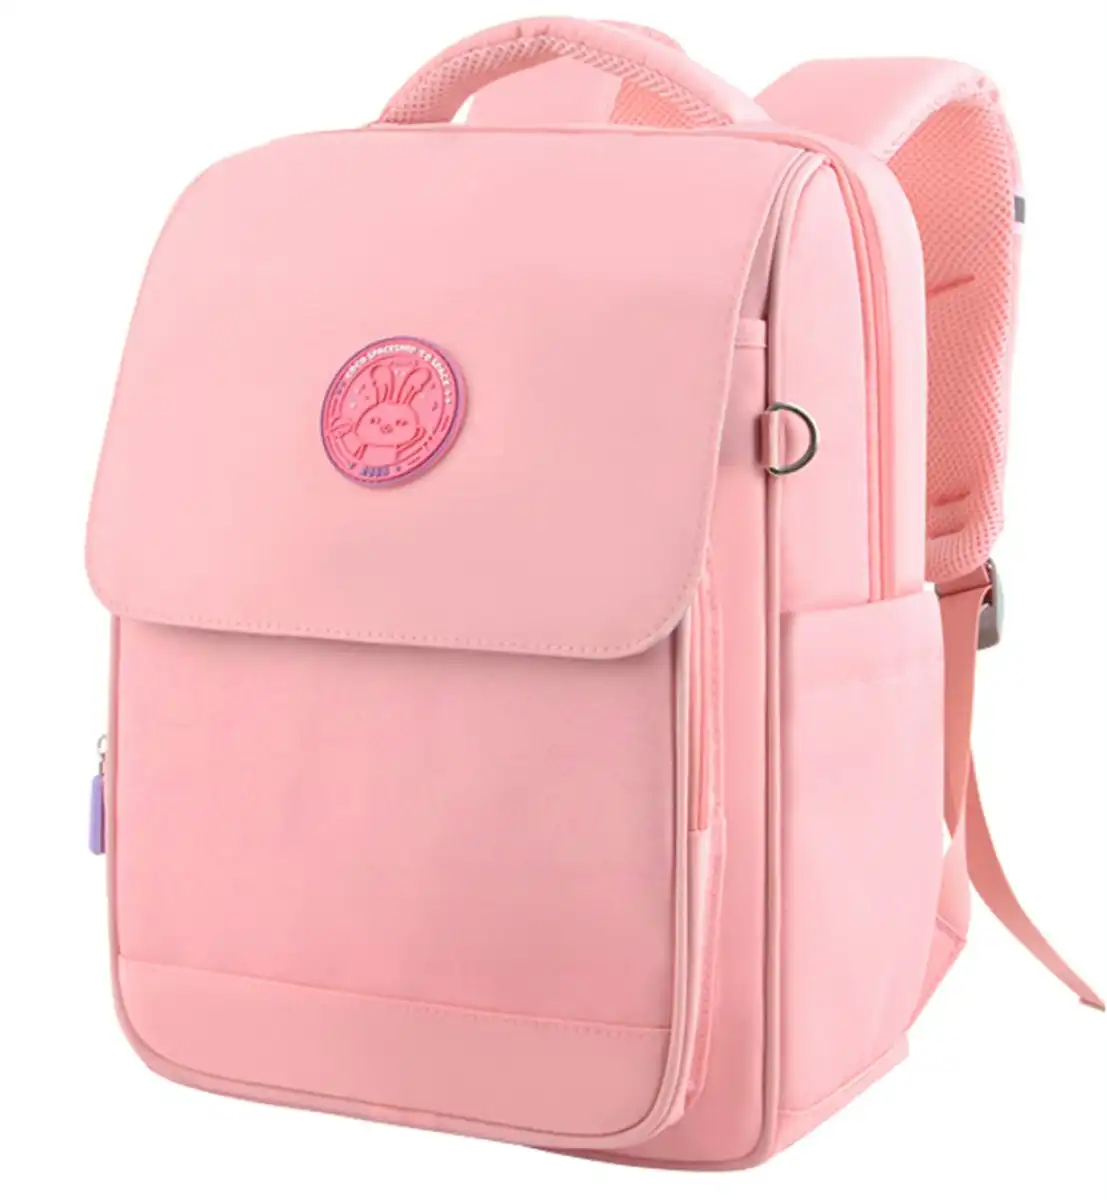 Yome Kids School Backpack With Back Support and Airflow Systerm For Year 3-6 Students Y21 Pink